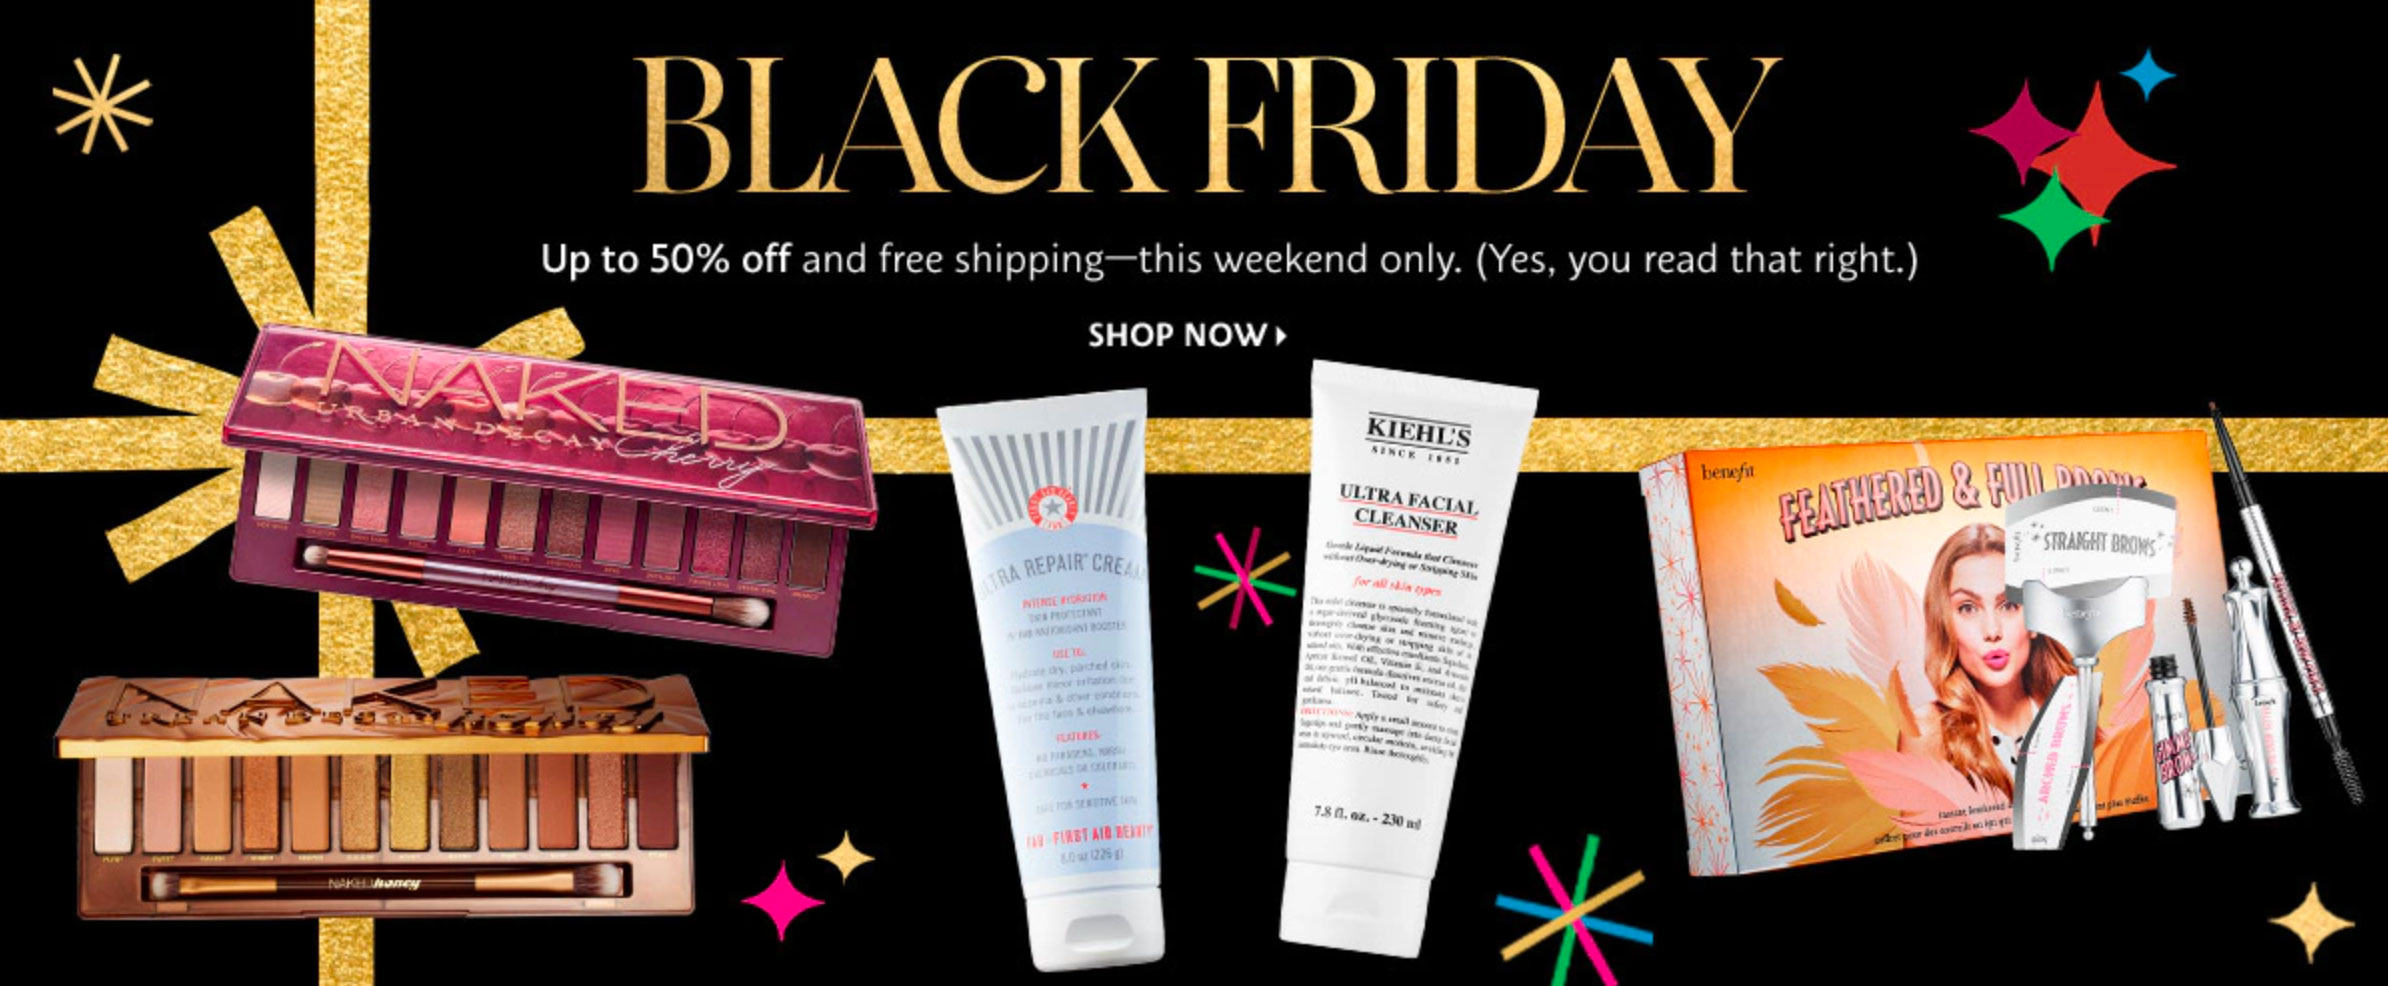 Sephora Black Friday 2021 Ad, Sales, and Deals - When Do Black Friday Deals Stat Sephora